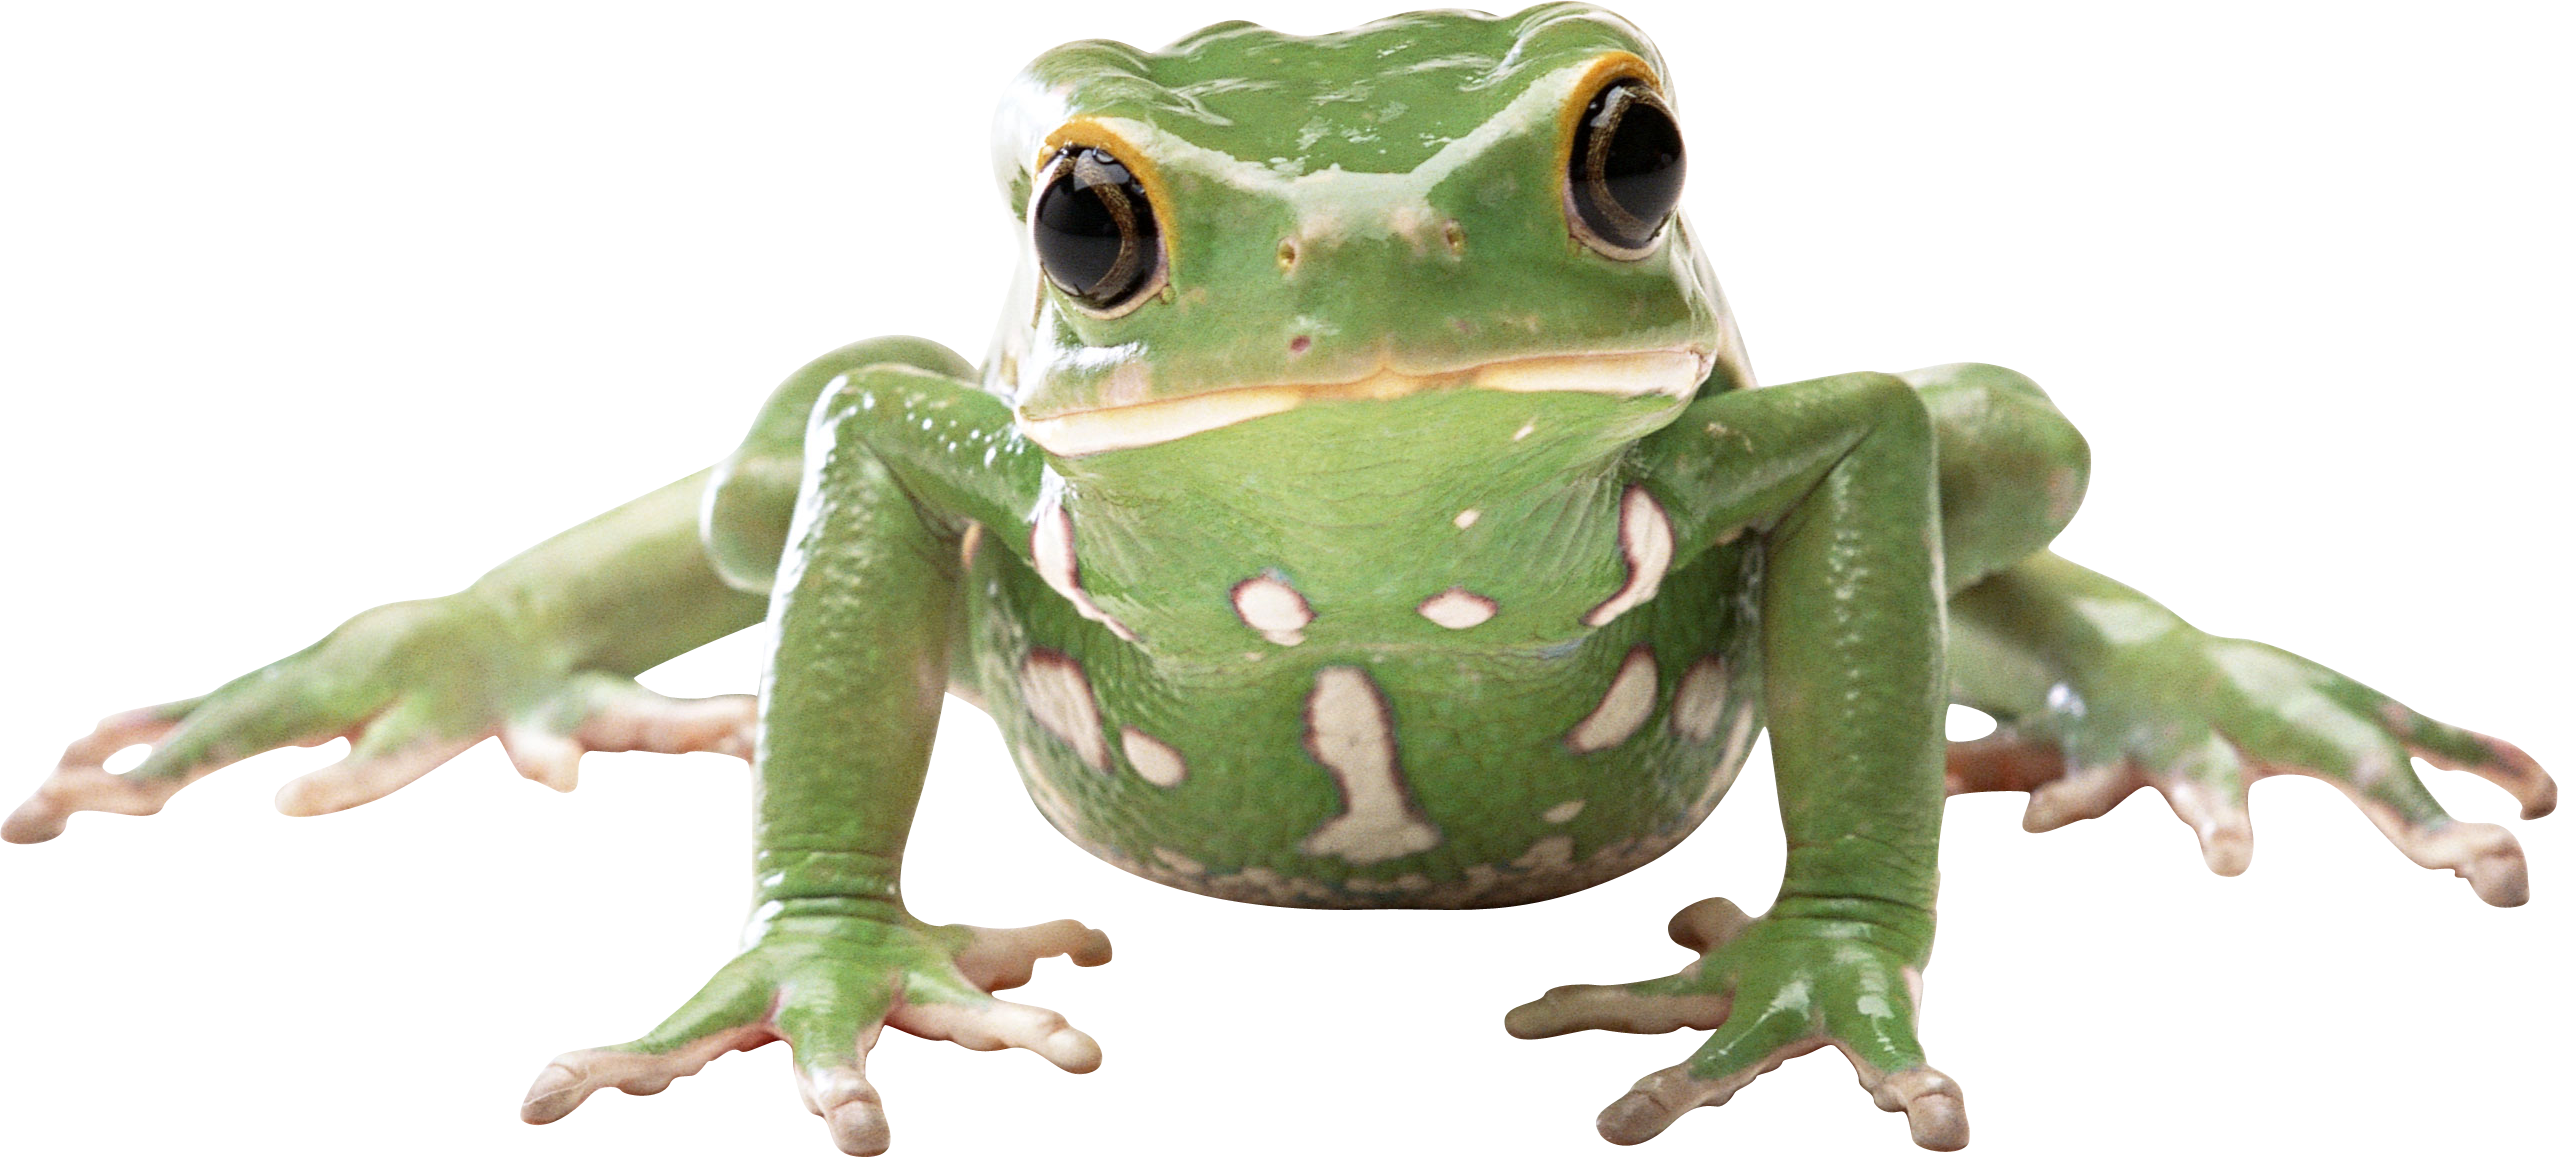 Amphibian Transparent Png - Amphibian, Transparent background PNG HD thumbnail